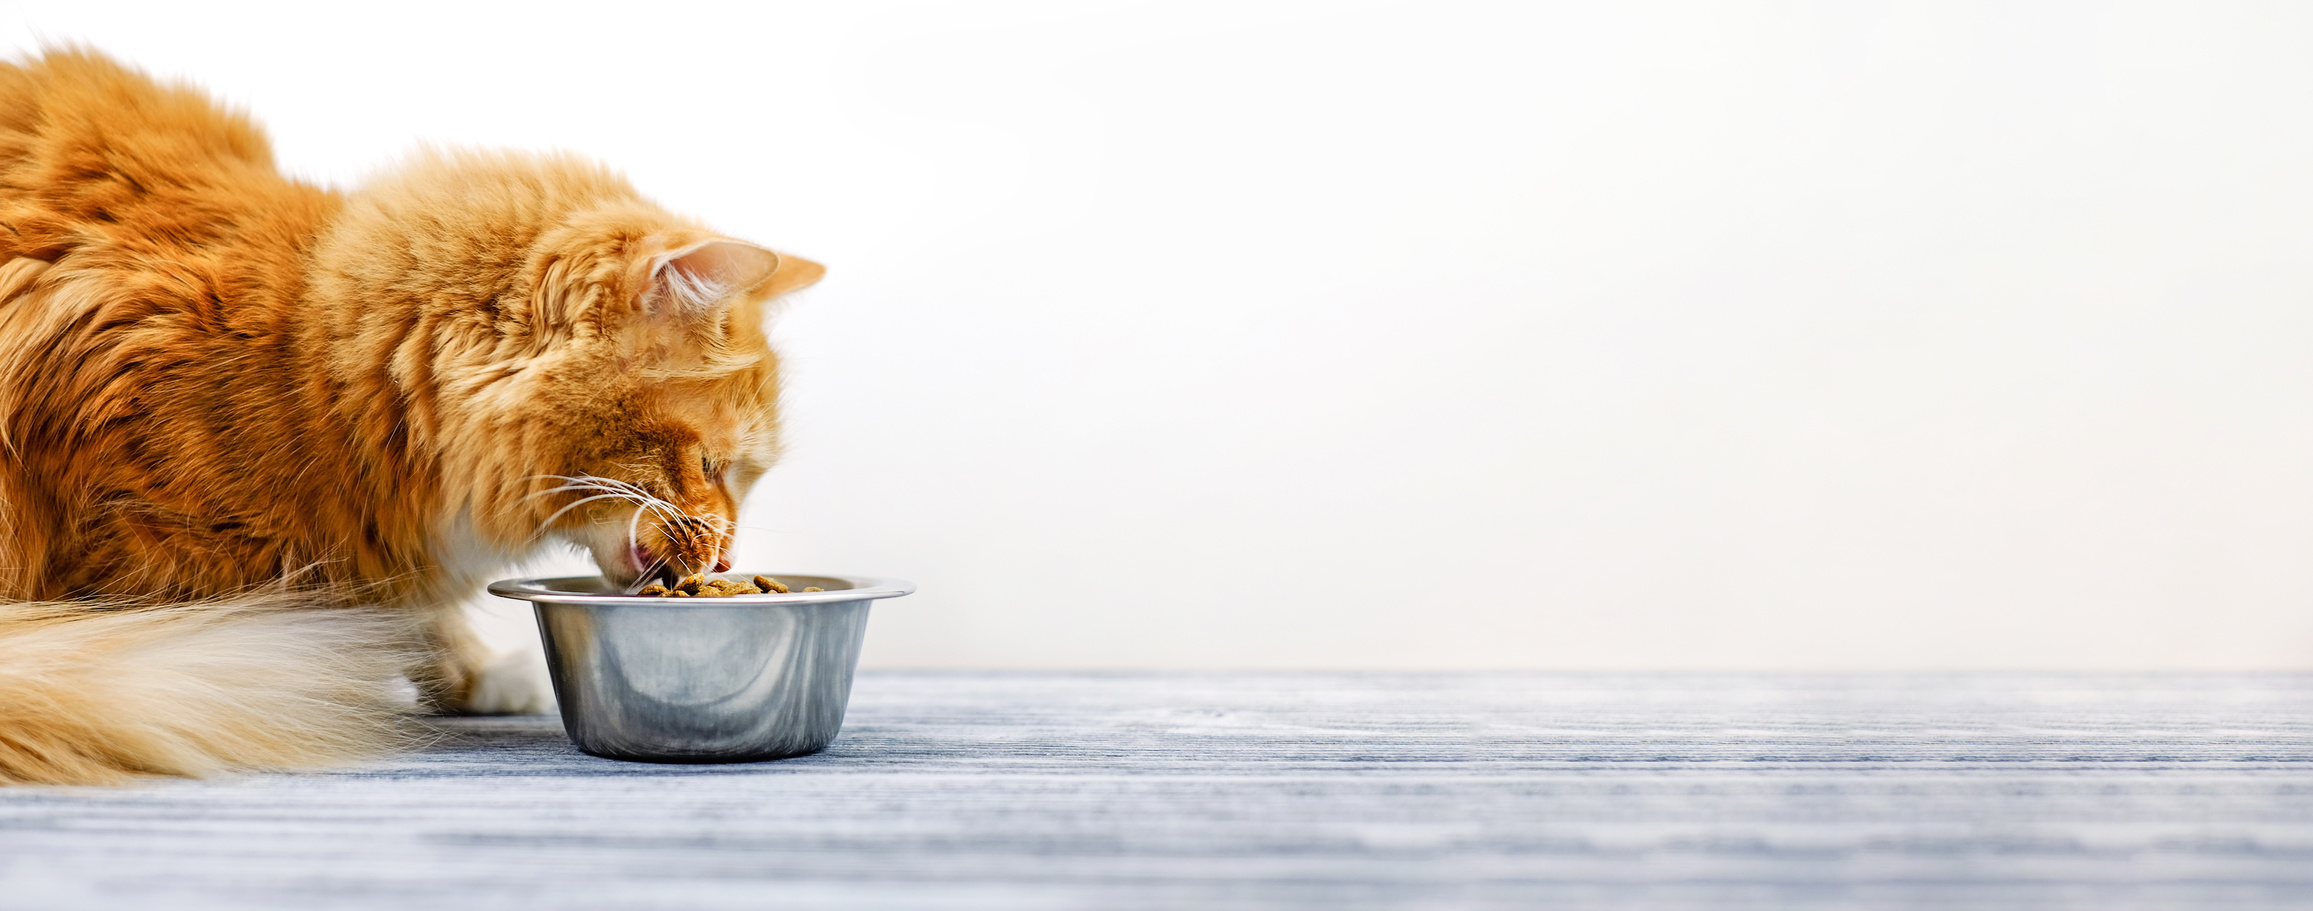 Ginger cat eating cat's food from a bowl. Banner, copy space